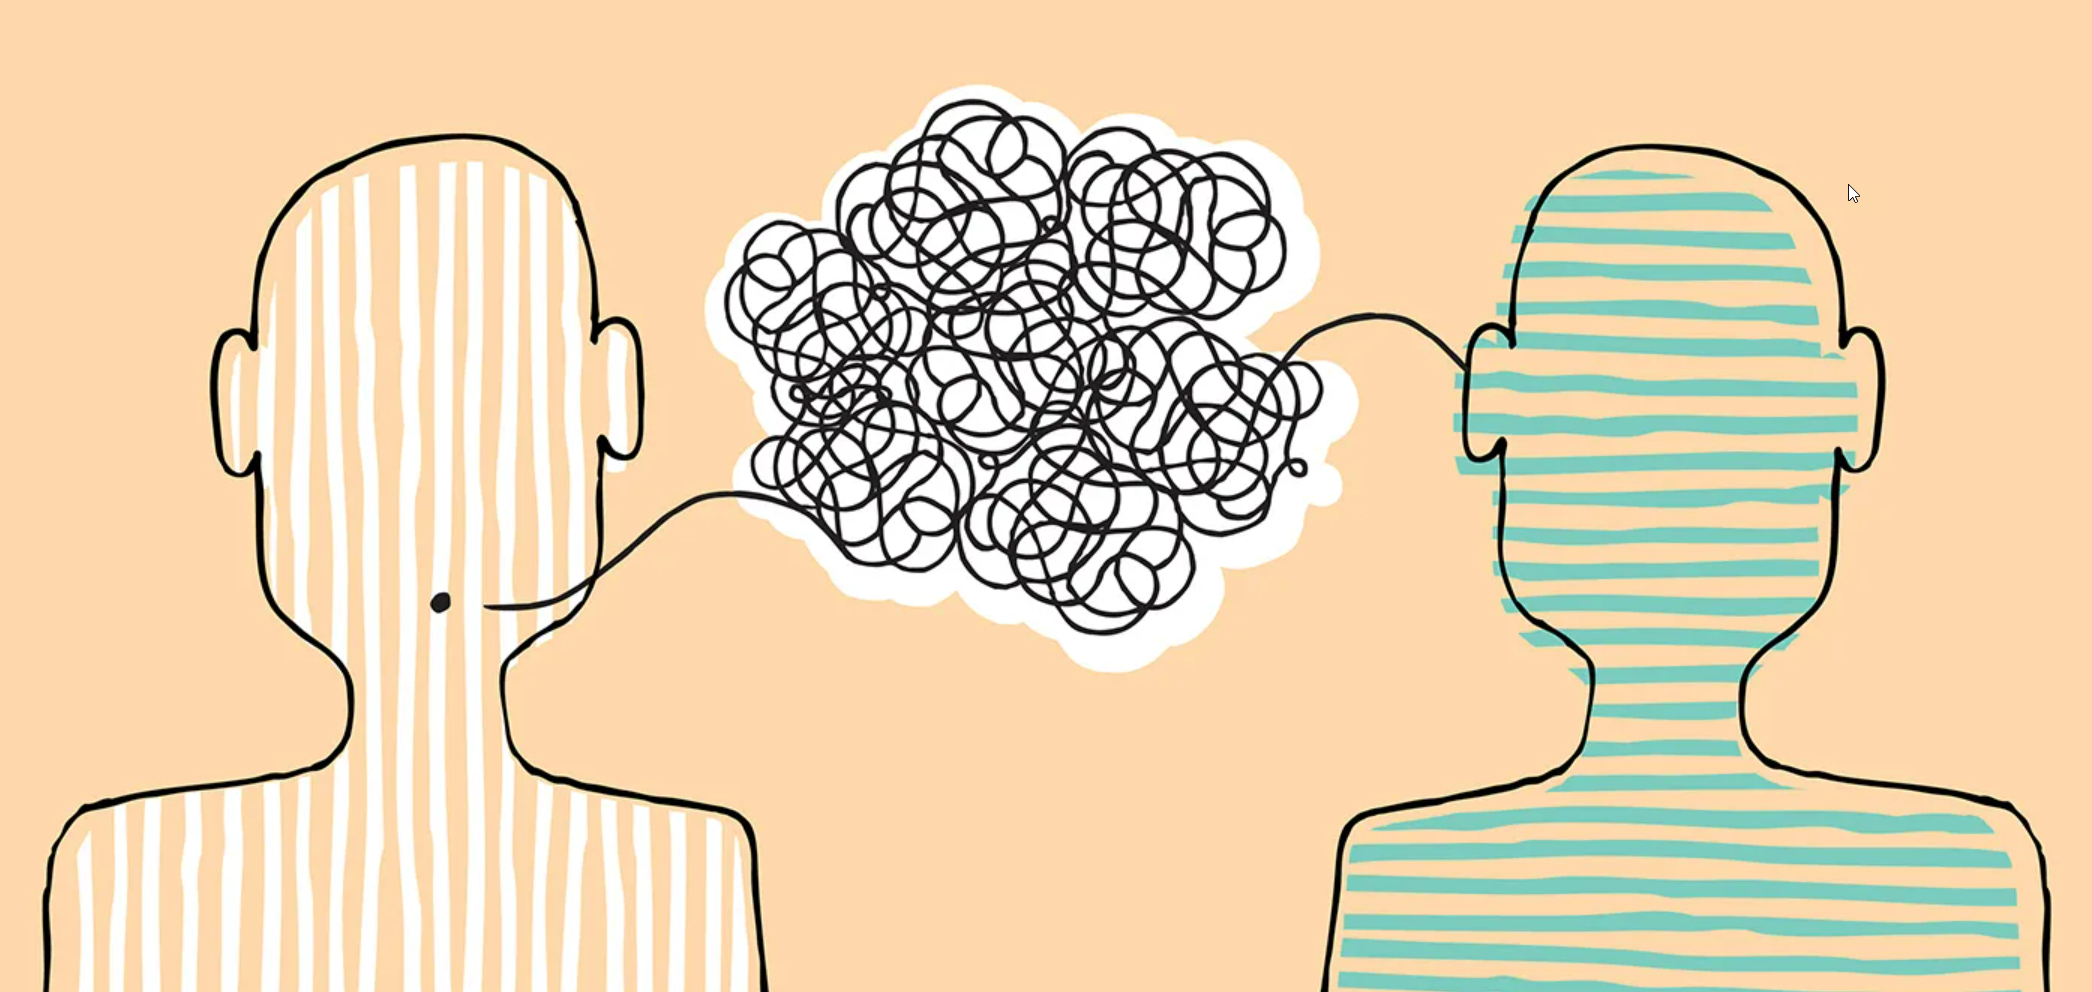 Drawing of two talking heads with a scrambled thoughts in the middle to depict a language barrier